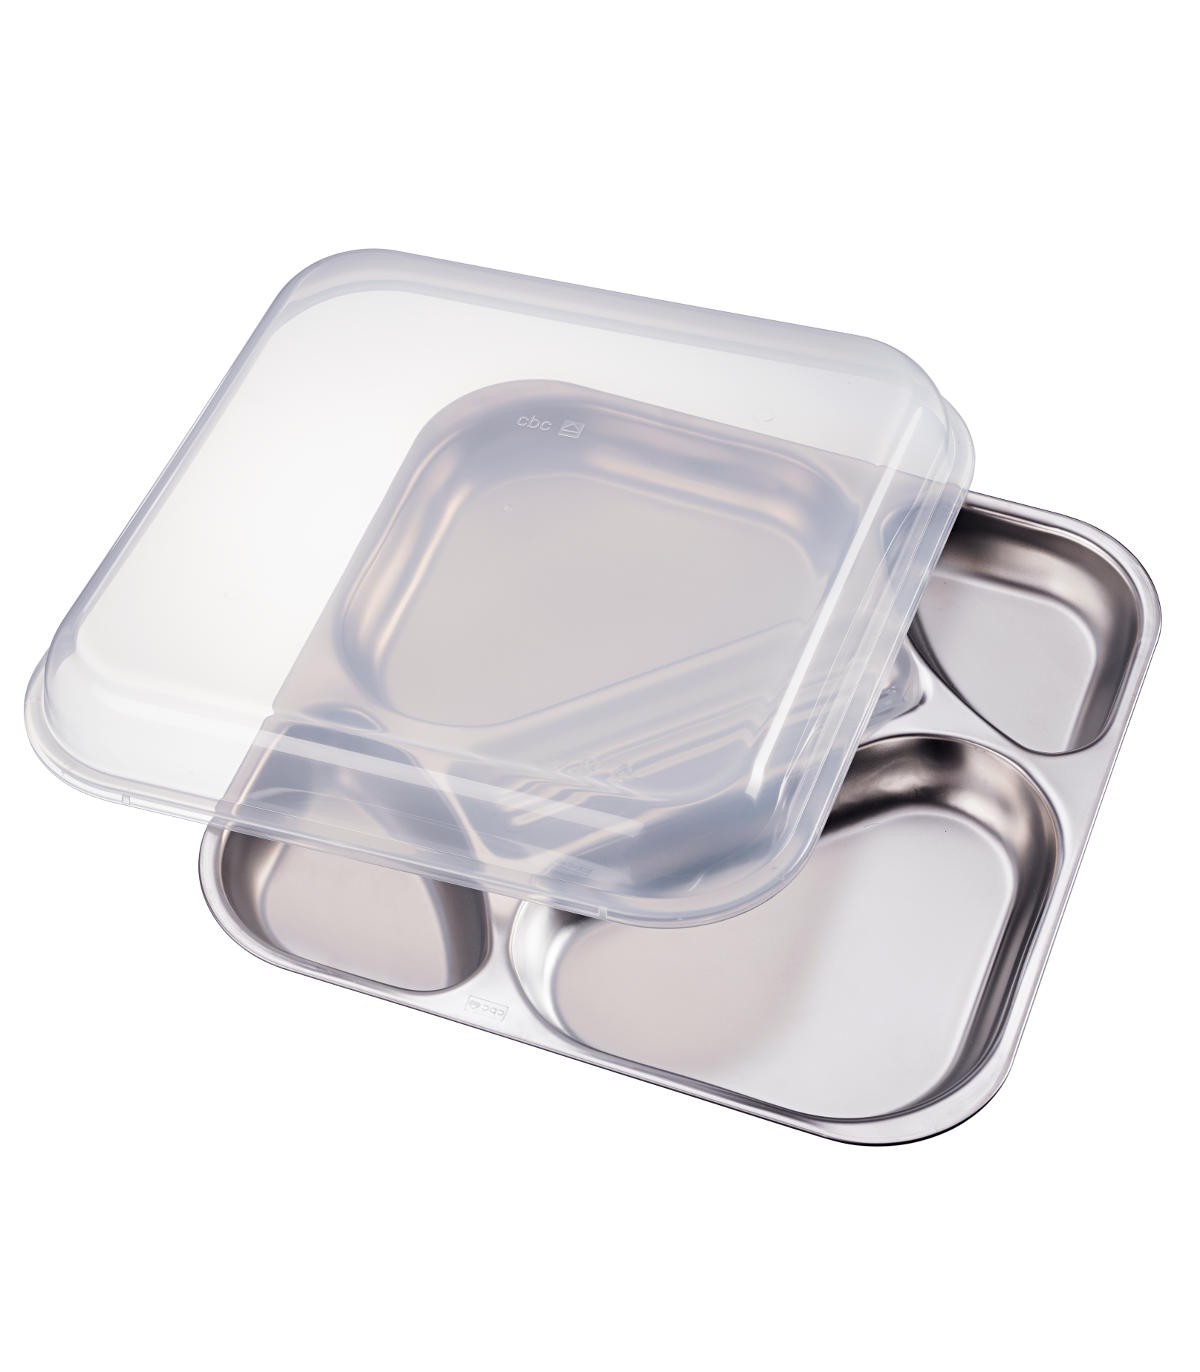  Qiuxunies Food Preservation Tray - with Stretch Cover